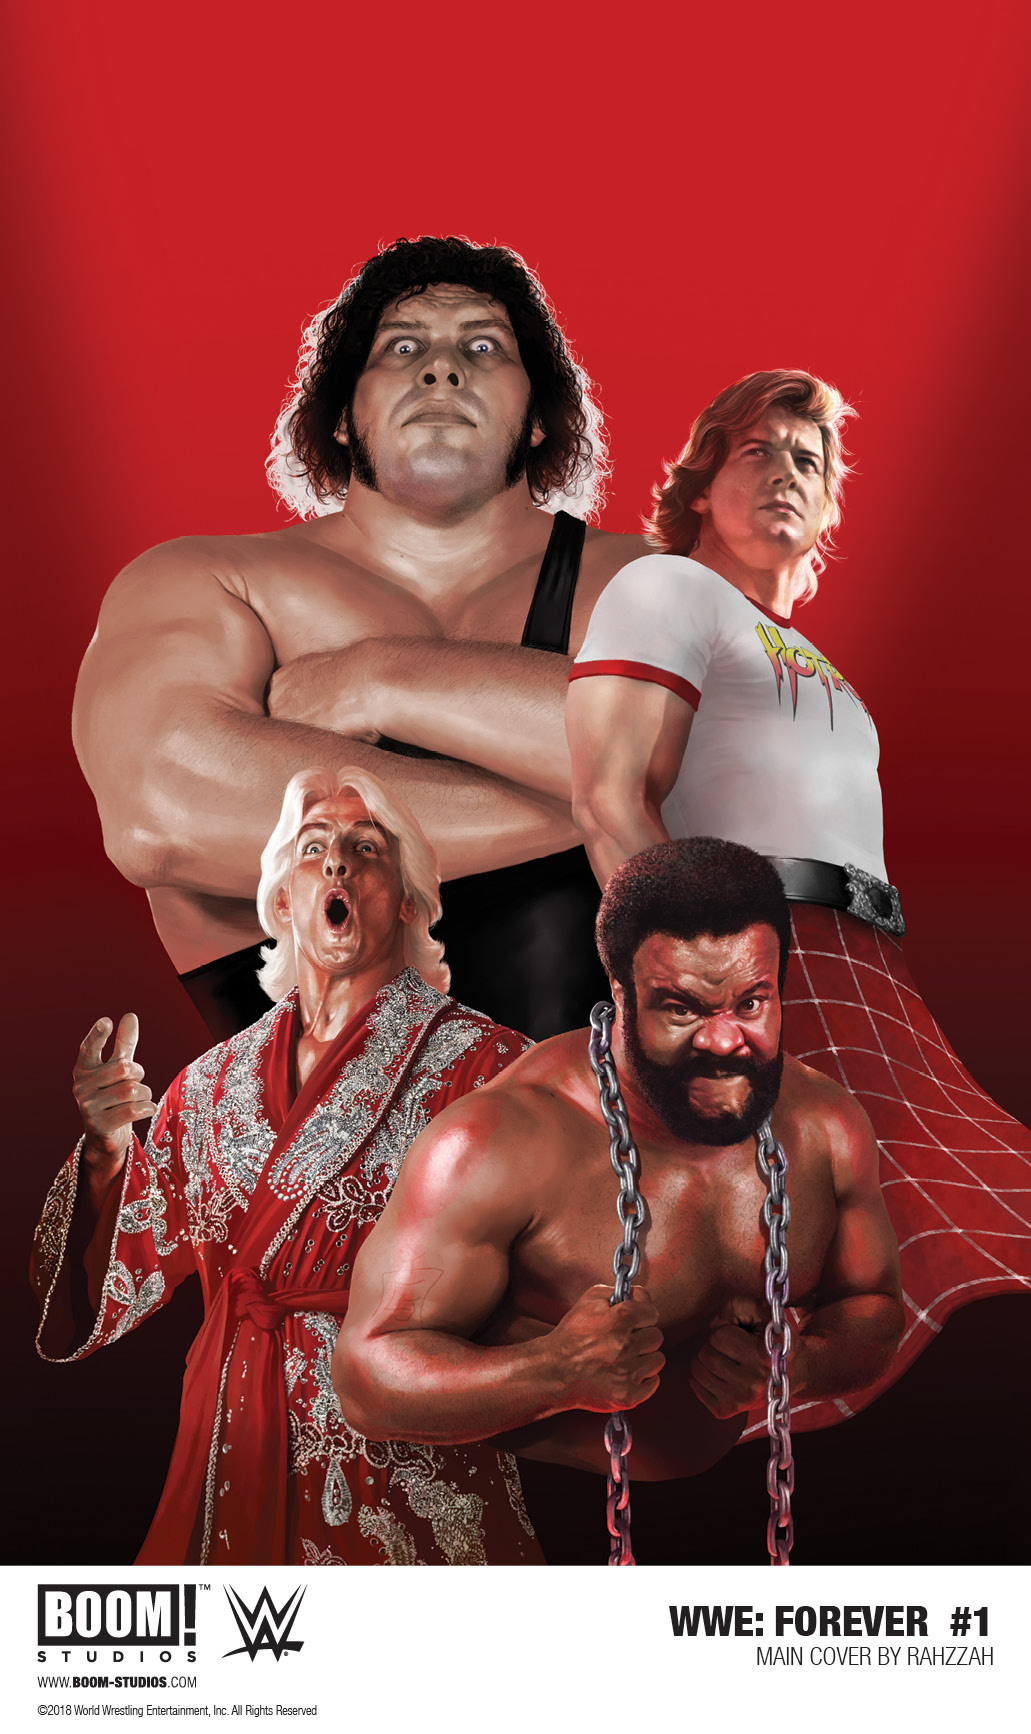 First Look: WWE: Forever #1 featuring legends Andre the Giant, "Rowdy" Roddy Piper, Junkyard Dog, Ric Flair